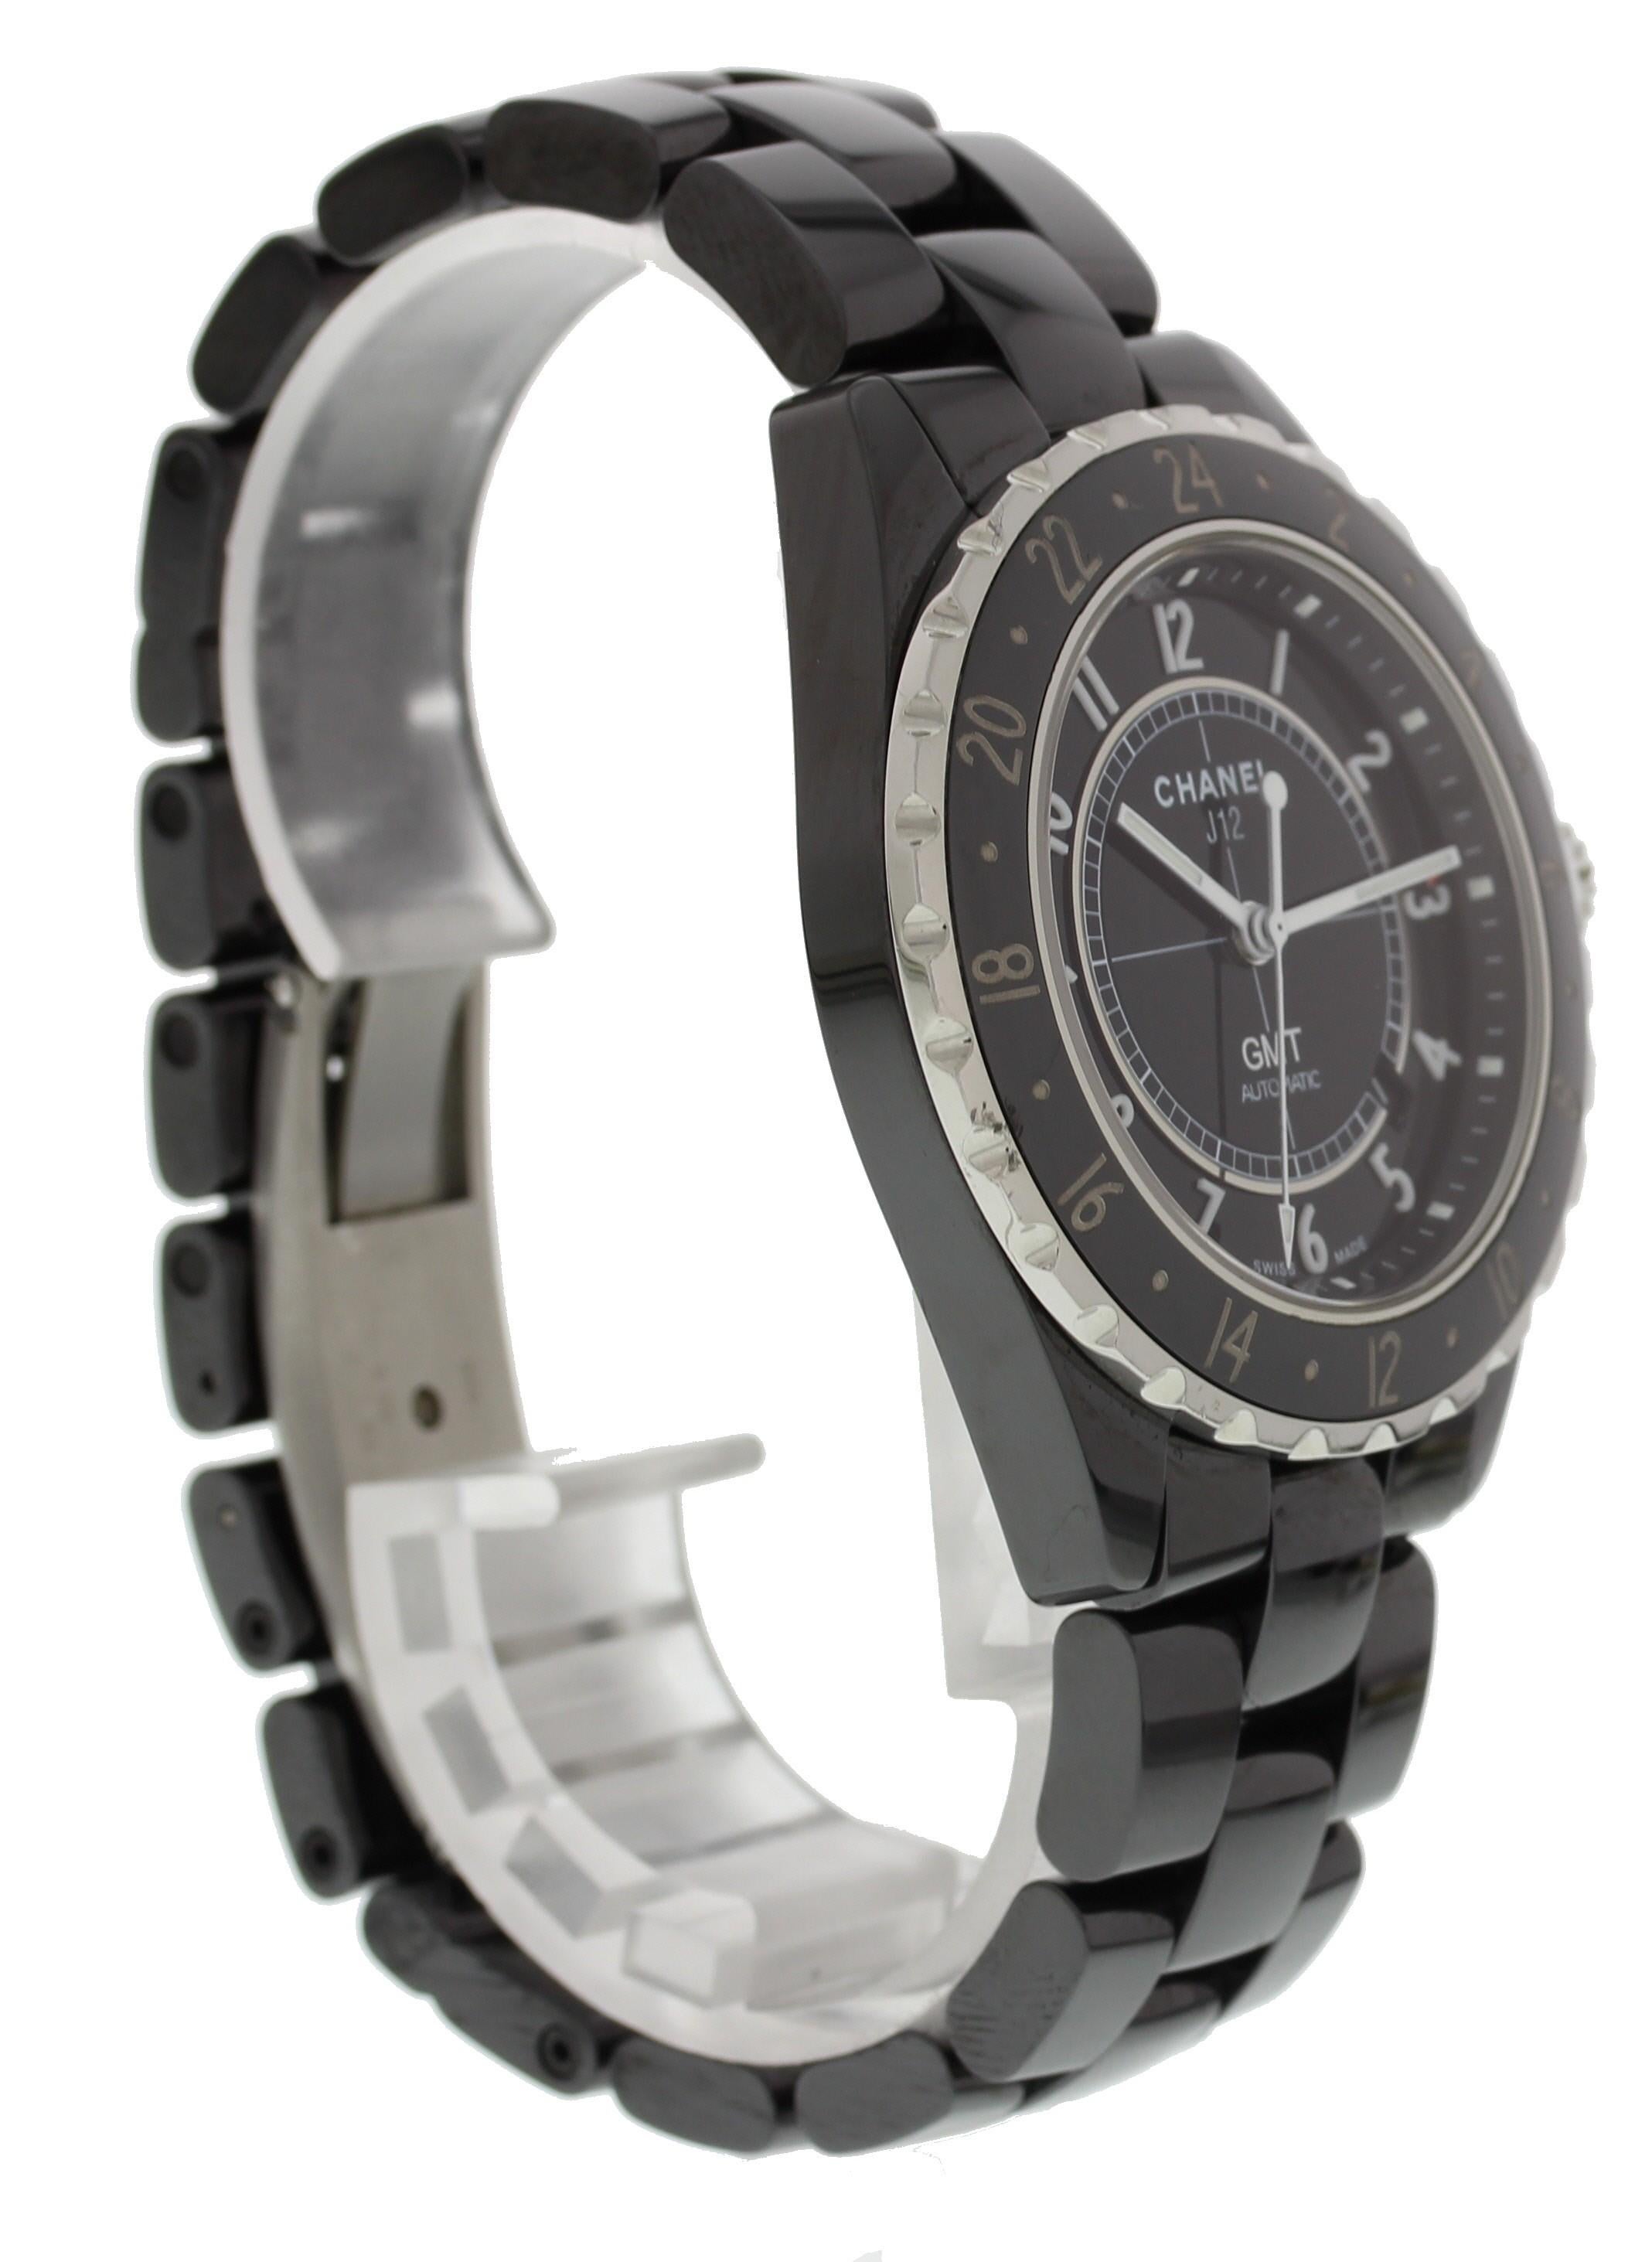 Contemporary Certified Chanel J12 H2012 with Band, Ceramic Bezel and Black Dial